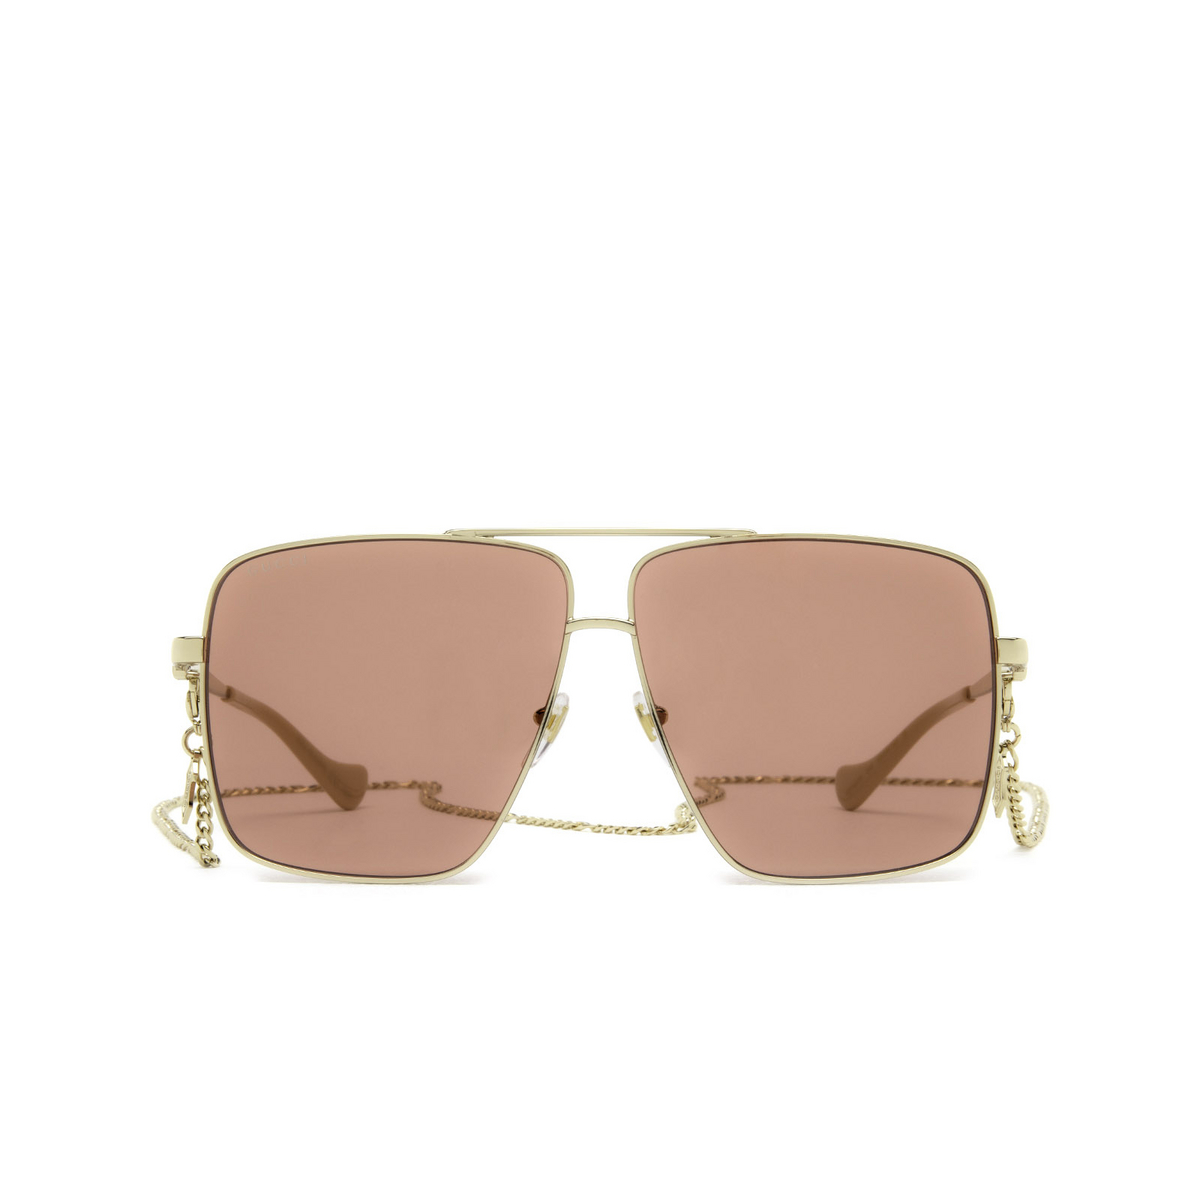 Gucci® Irregular Sunglasses: GG1087S color Gold 003 - front view.